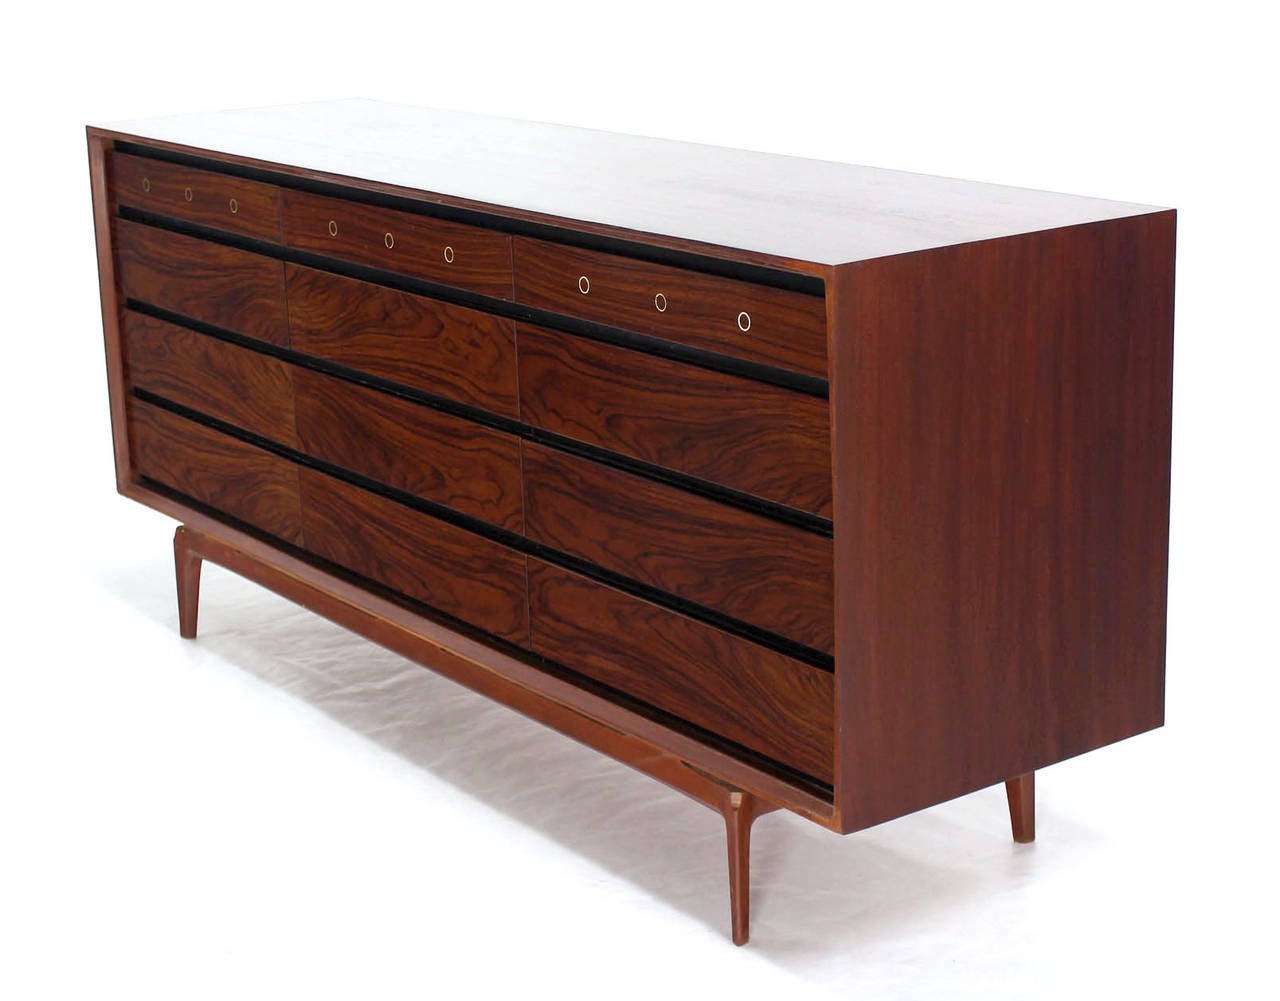 Rosewood and Walnut Midcentury Modern Twelve-Drawer Dresser with Brass Accents 1